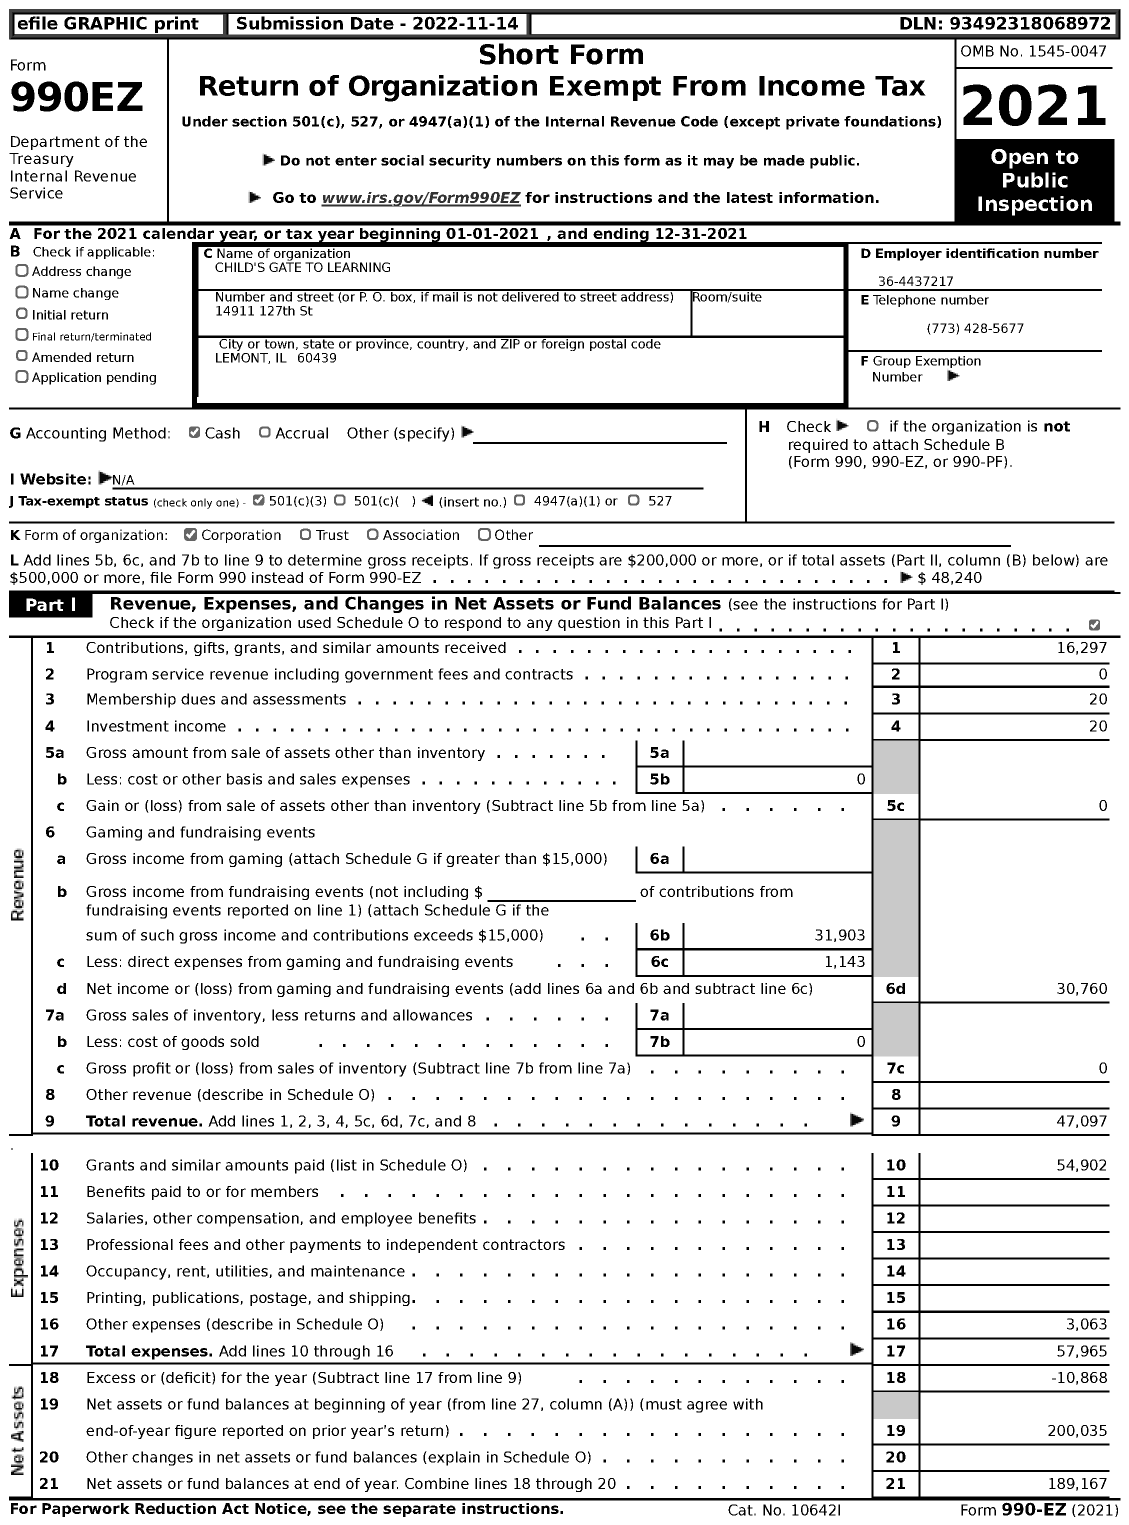 Image of first page of 2021 Form 990EZ for Child's Gate To Learning